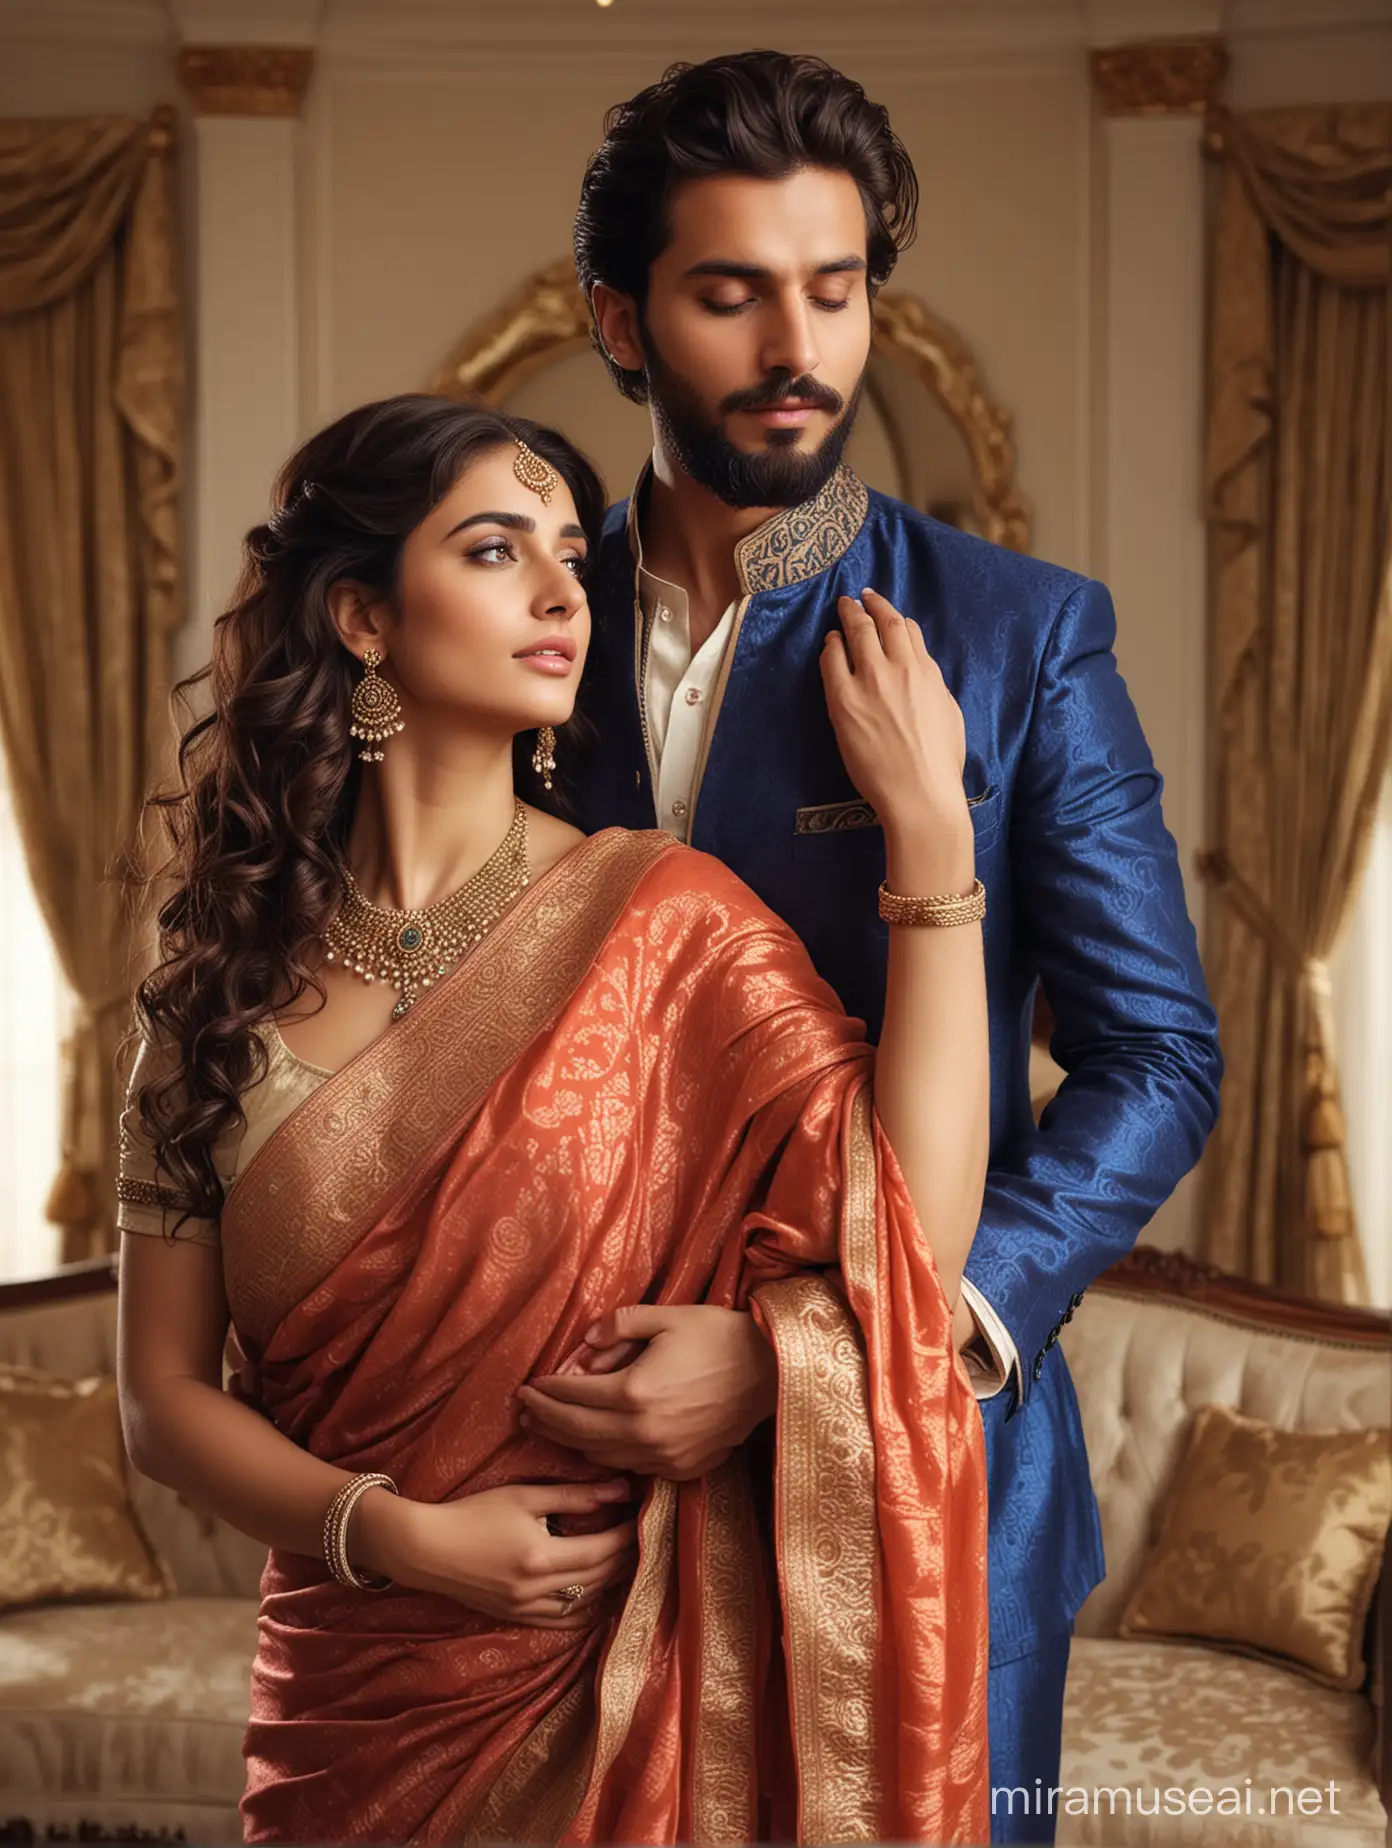 full body view  of most beautiful european couple as most beautiful indian couple, most beautiful girl in elegant bold color saree and long curly hairs, hairs tied  up with hair style stylishly,  big wide black  eyes, full face, makeup, low cut neck, girl embracing with emotion and possessive feeling, pressing face to chest of man, emotional crying with longing feeling, innocence and ecstasy, hands around man neck, man comforting her,  man with stylish beard, perfect hair cut, formals, photo realistic, 4k.
background,spacious modern elite photo room, with luxury sofa set, cream color carpet, elegant interior designs, big window for out side view, vintage lamps, romantic reunion ambience, photorealistic, vibrant colors, intricate details, 8k.